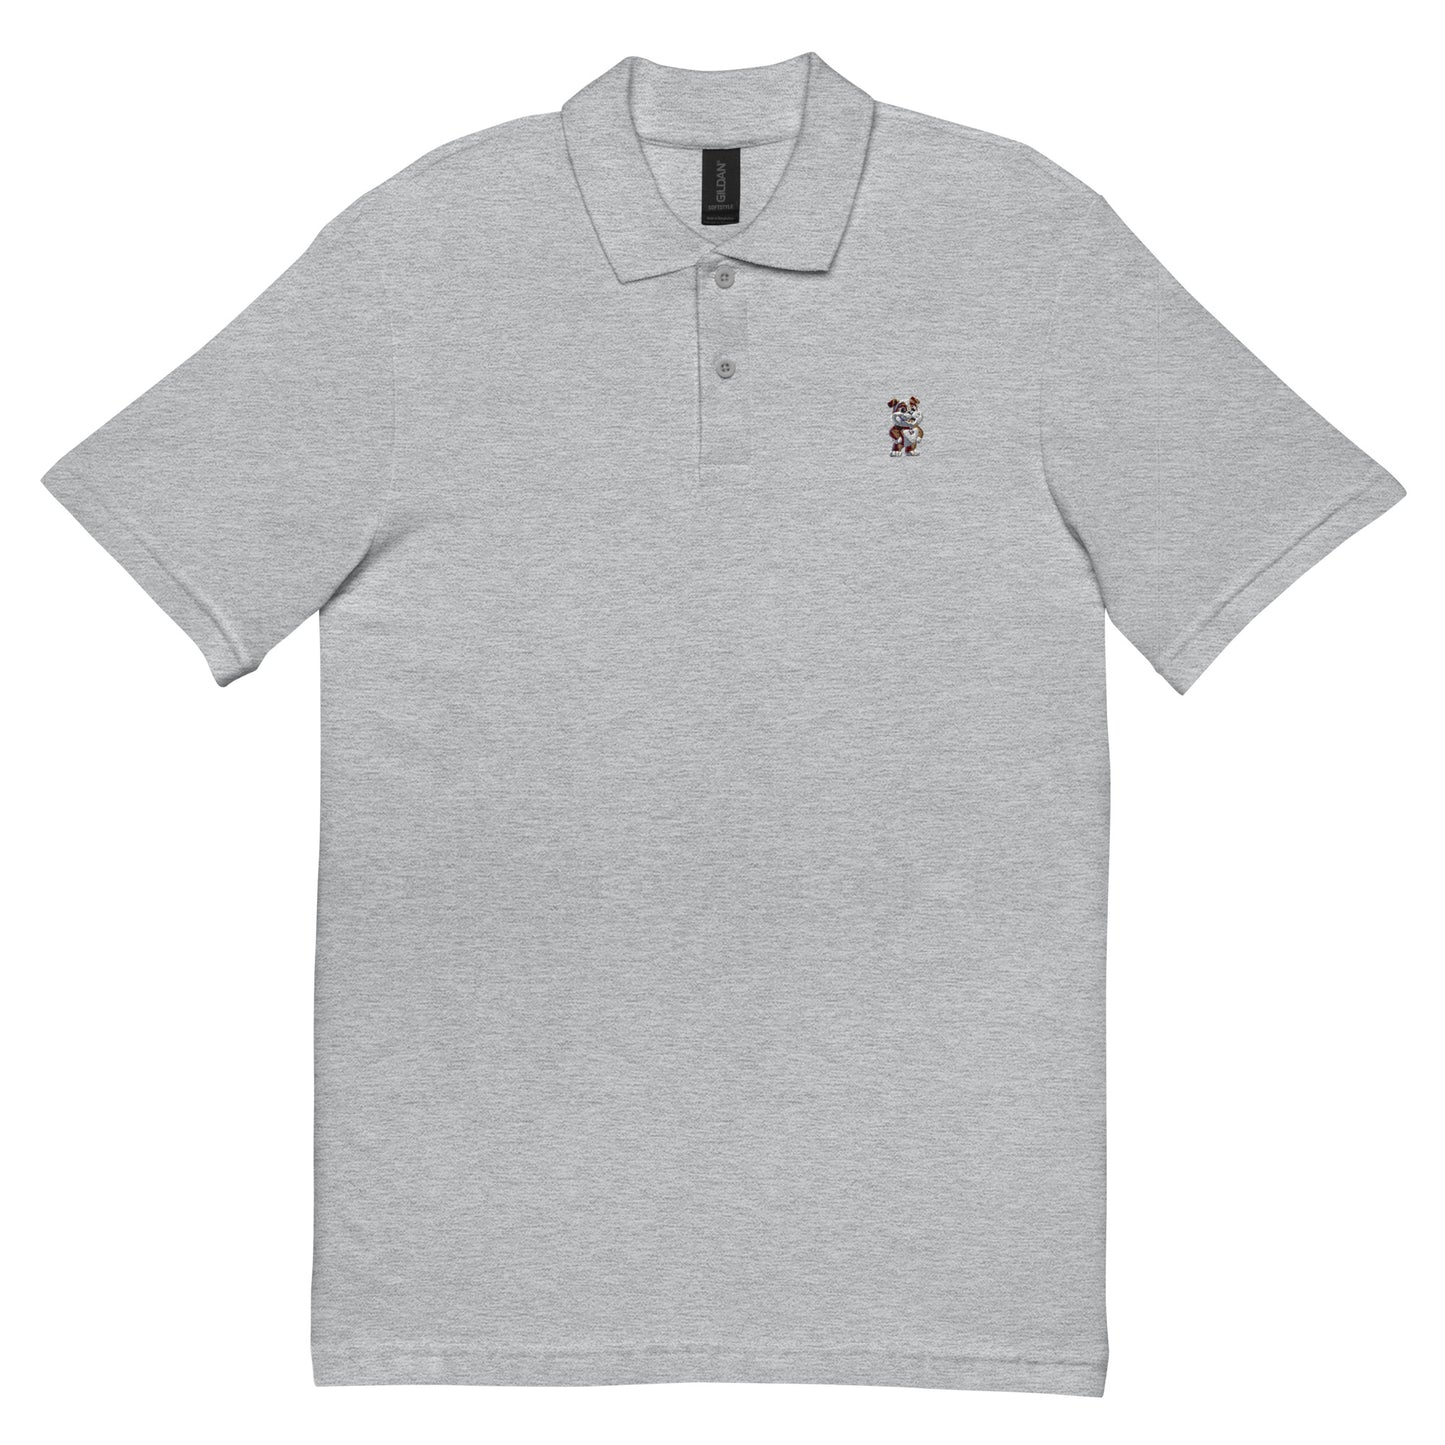 The only one: Unisex polo shirt